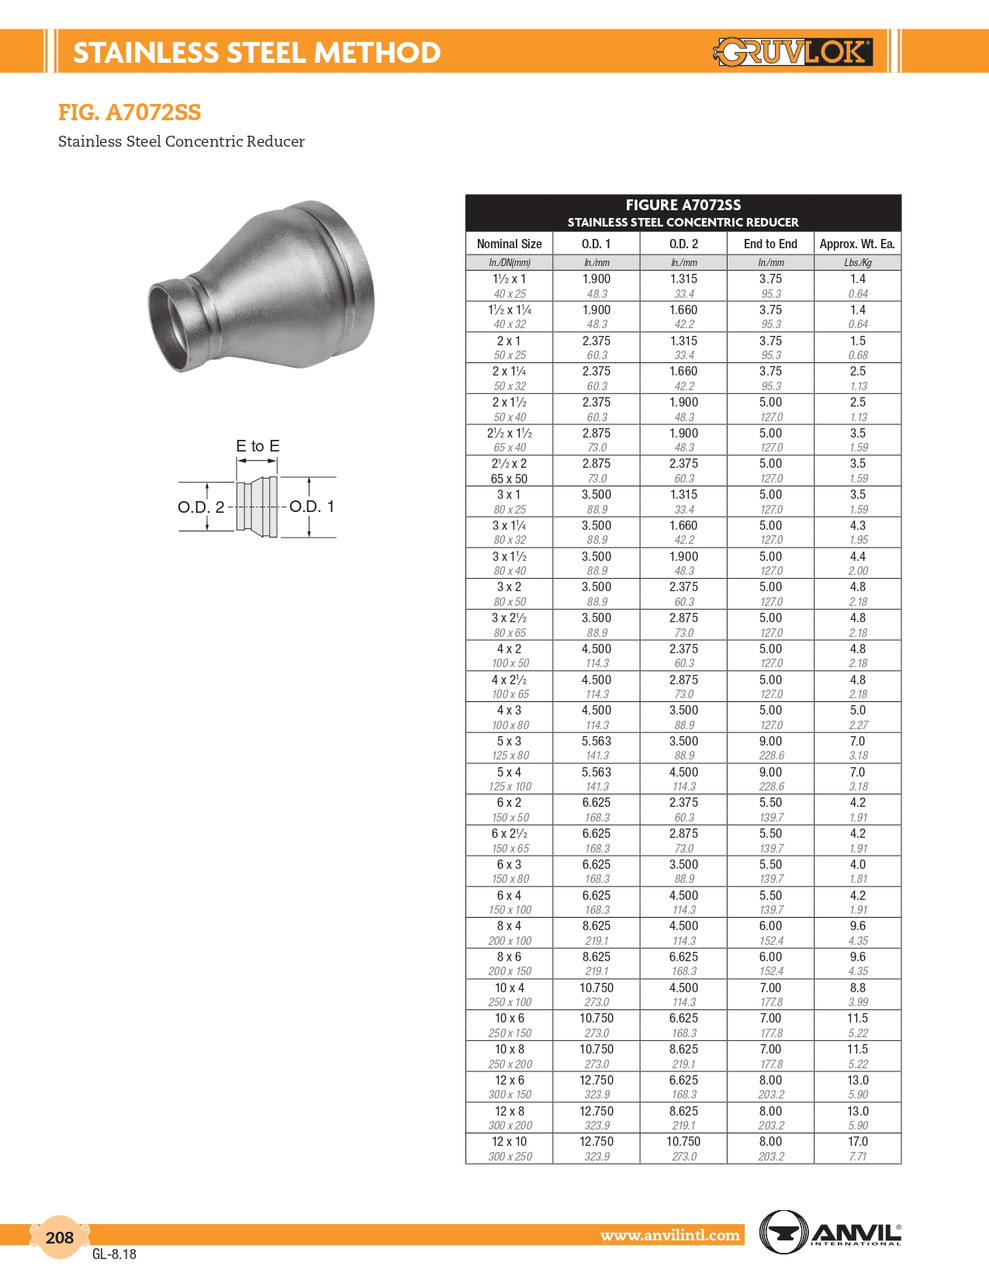 Fig. A7072SS Stainless Concentric Reducer 3 x 1-1/2"